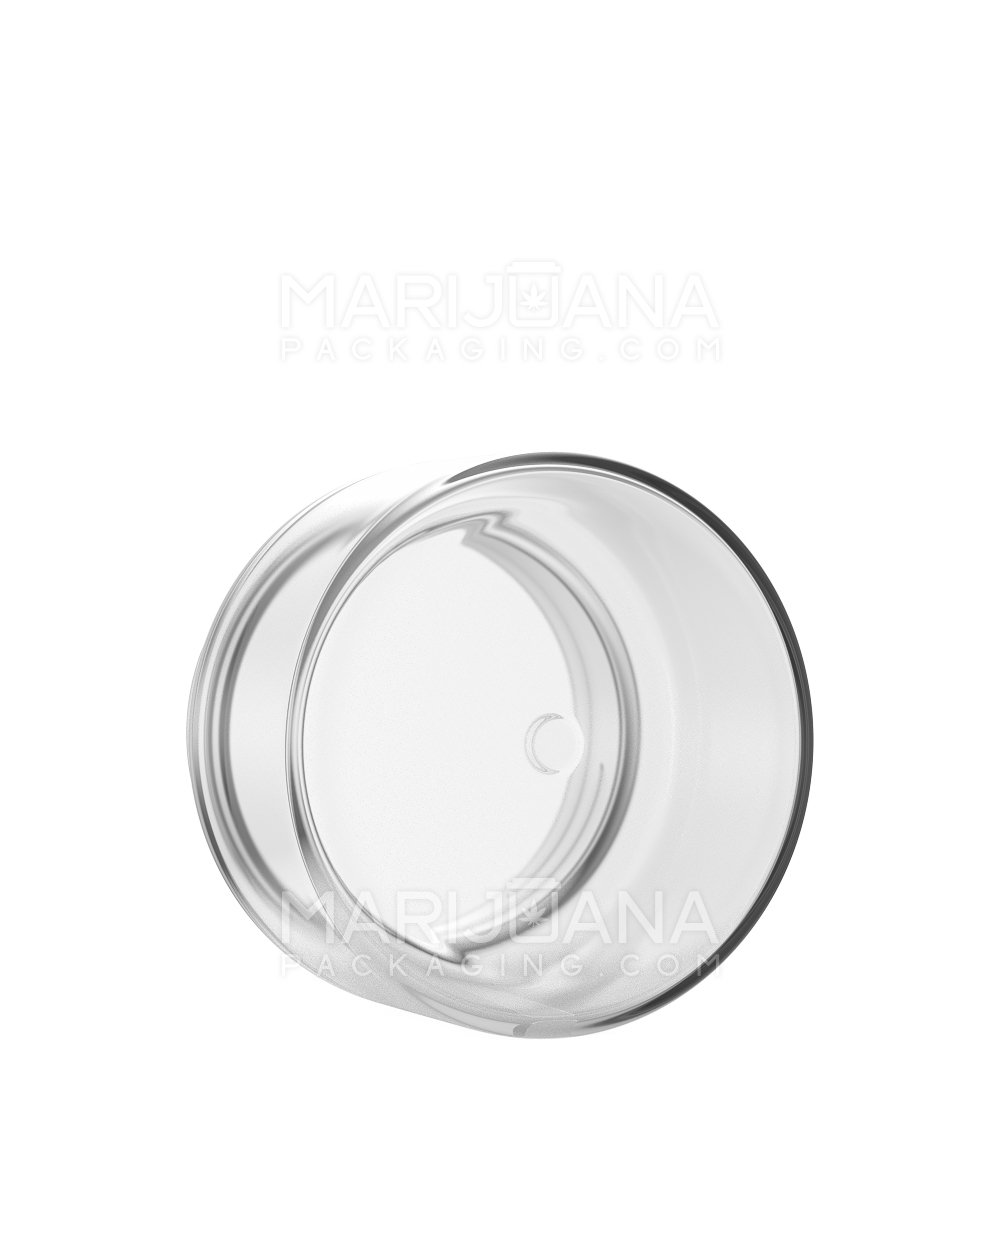 Straight Sided Clear Plastic Jars | 53mm - 2.5oz - 600 Count - 4